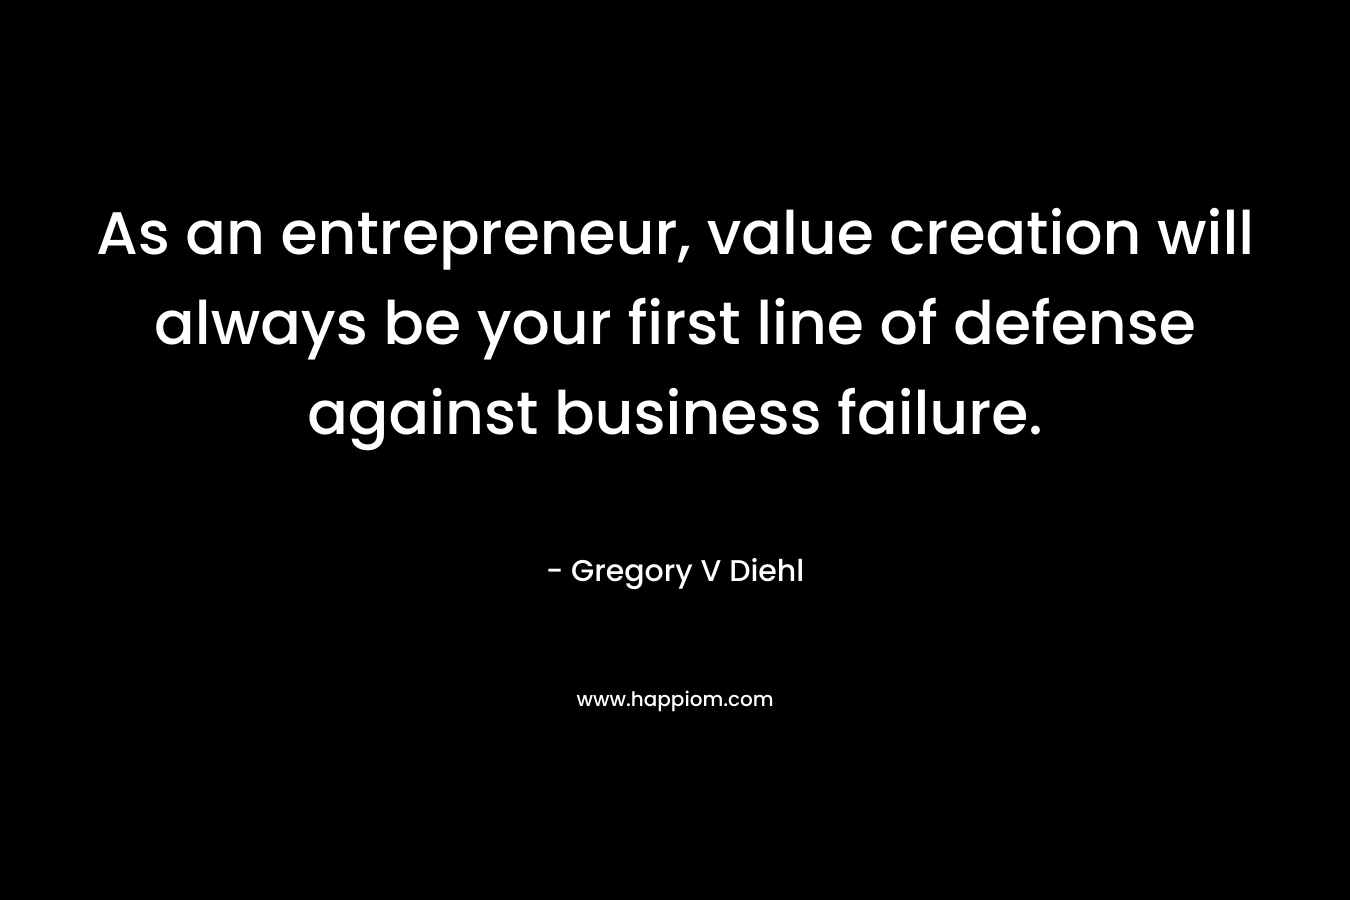 As an entrepreneur, value creation will always be your first line of defense against business failure. – Gregory V Diehl